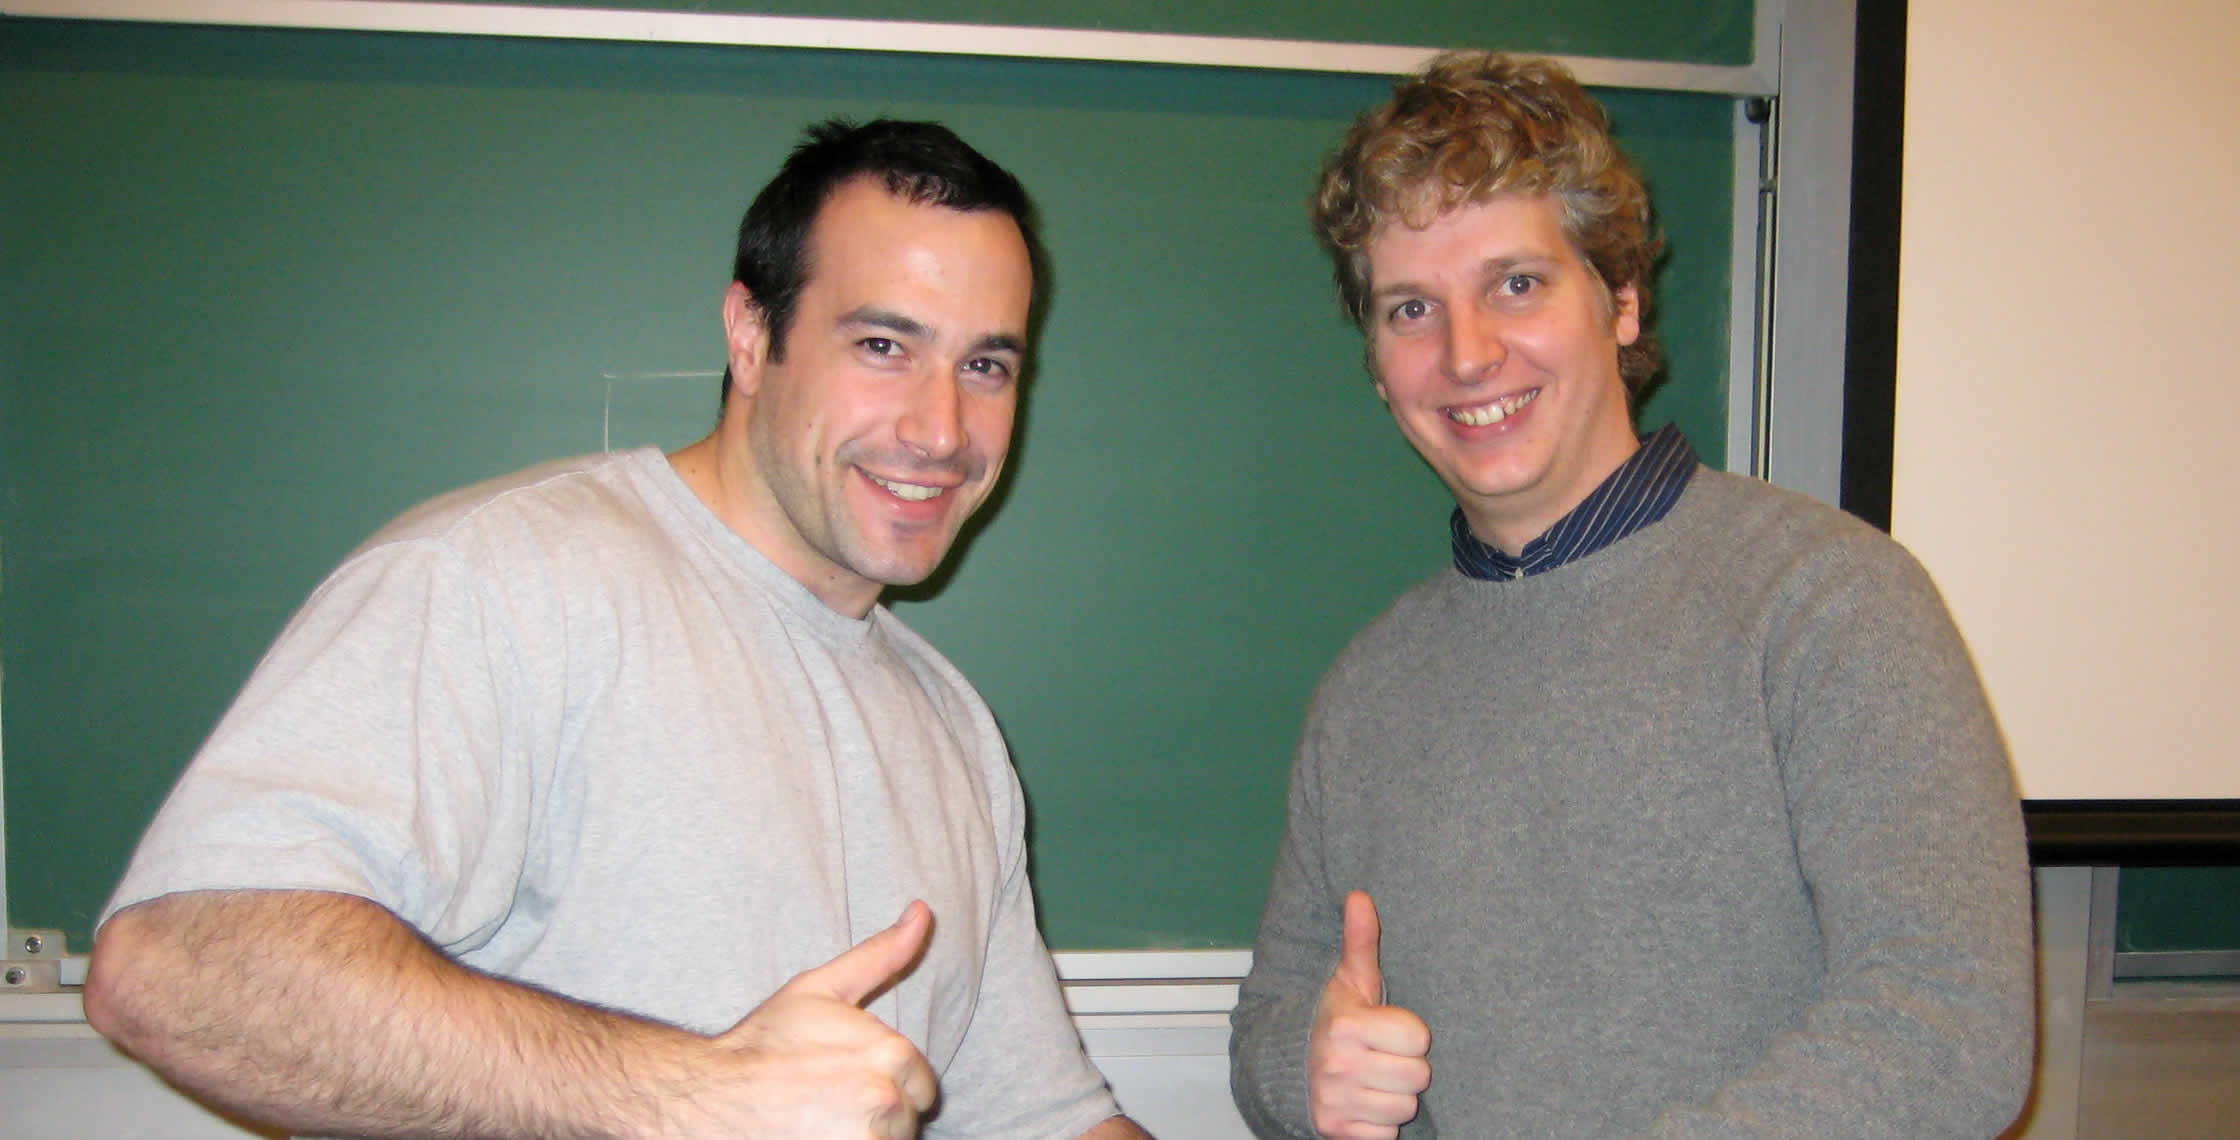 Ben Nadel at the New York ColdFusion User Group (Mar. 2008) with: Pete Freitag